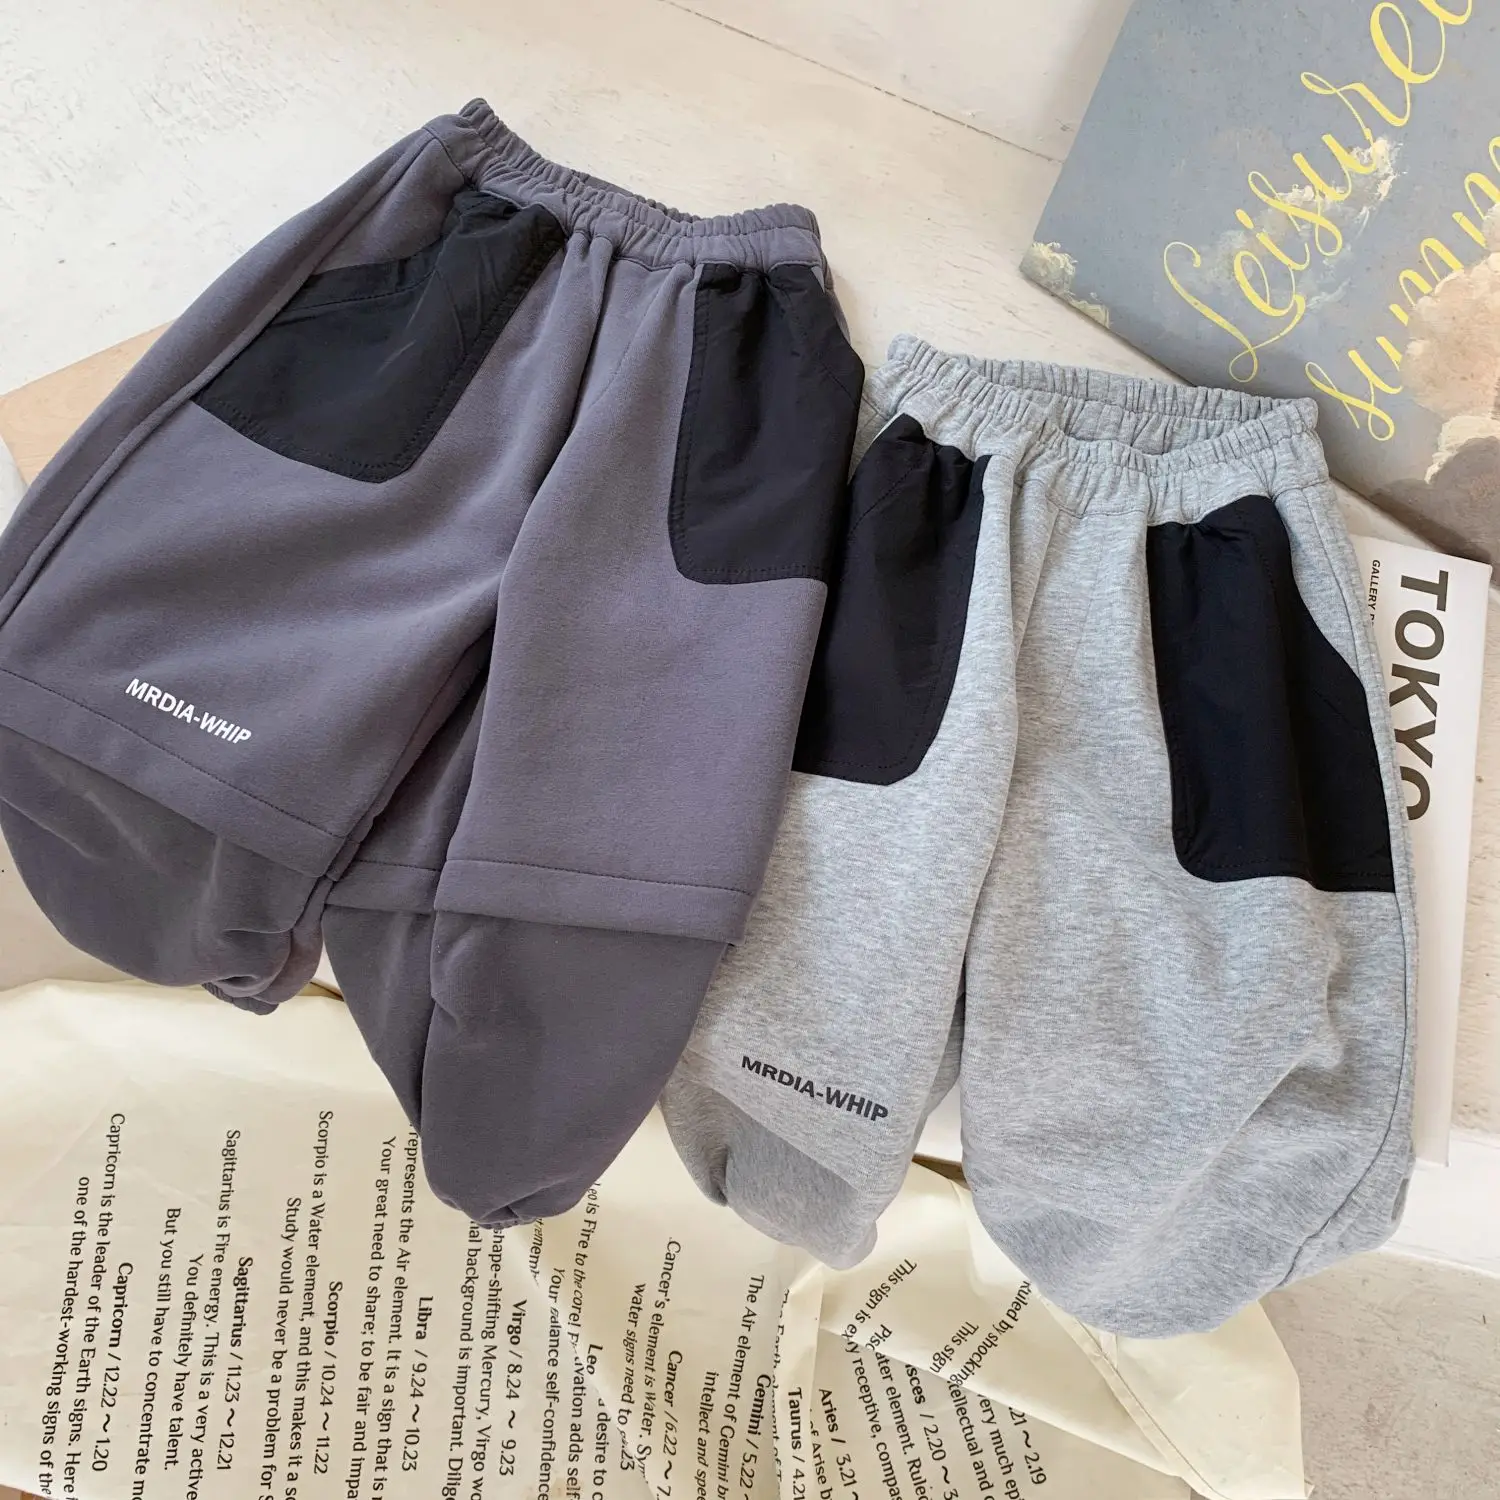 2022 New Children's Clothing Spring and Autumn Boys' Casual Pants Infant Jogging Sports Pants Outdoor Clothing 2-14 Years Old